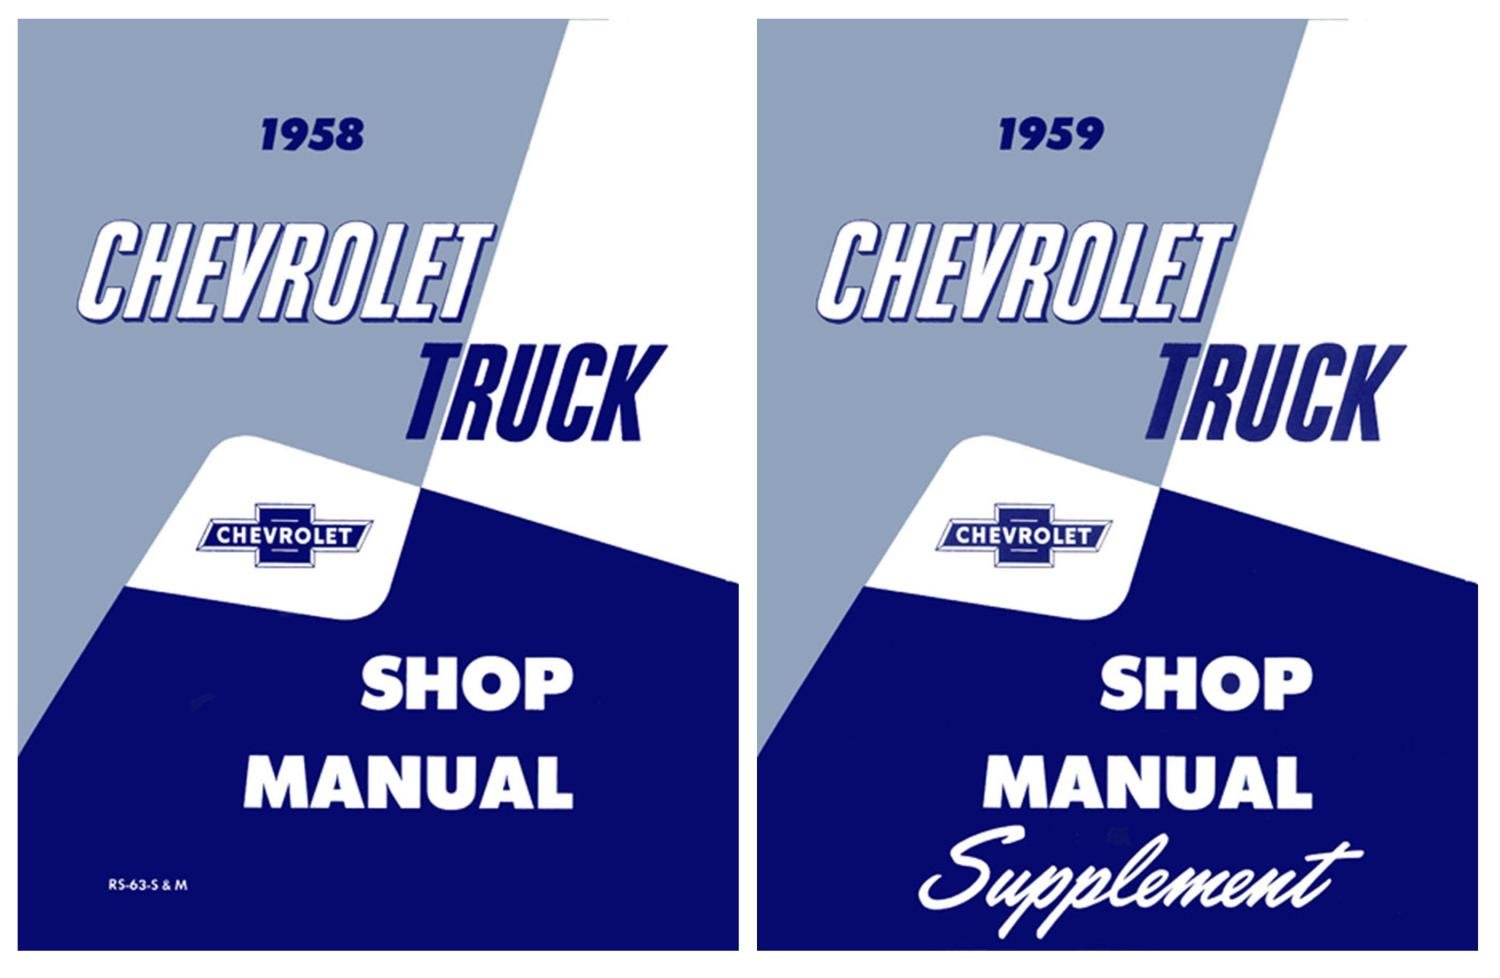 Shop and Supplement Manual Set for 1959 Chevrolet Trucks